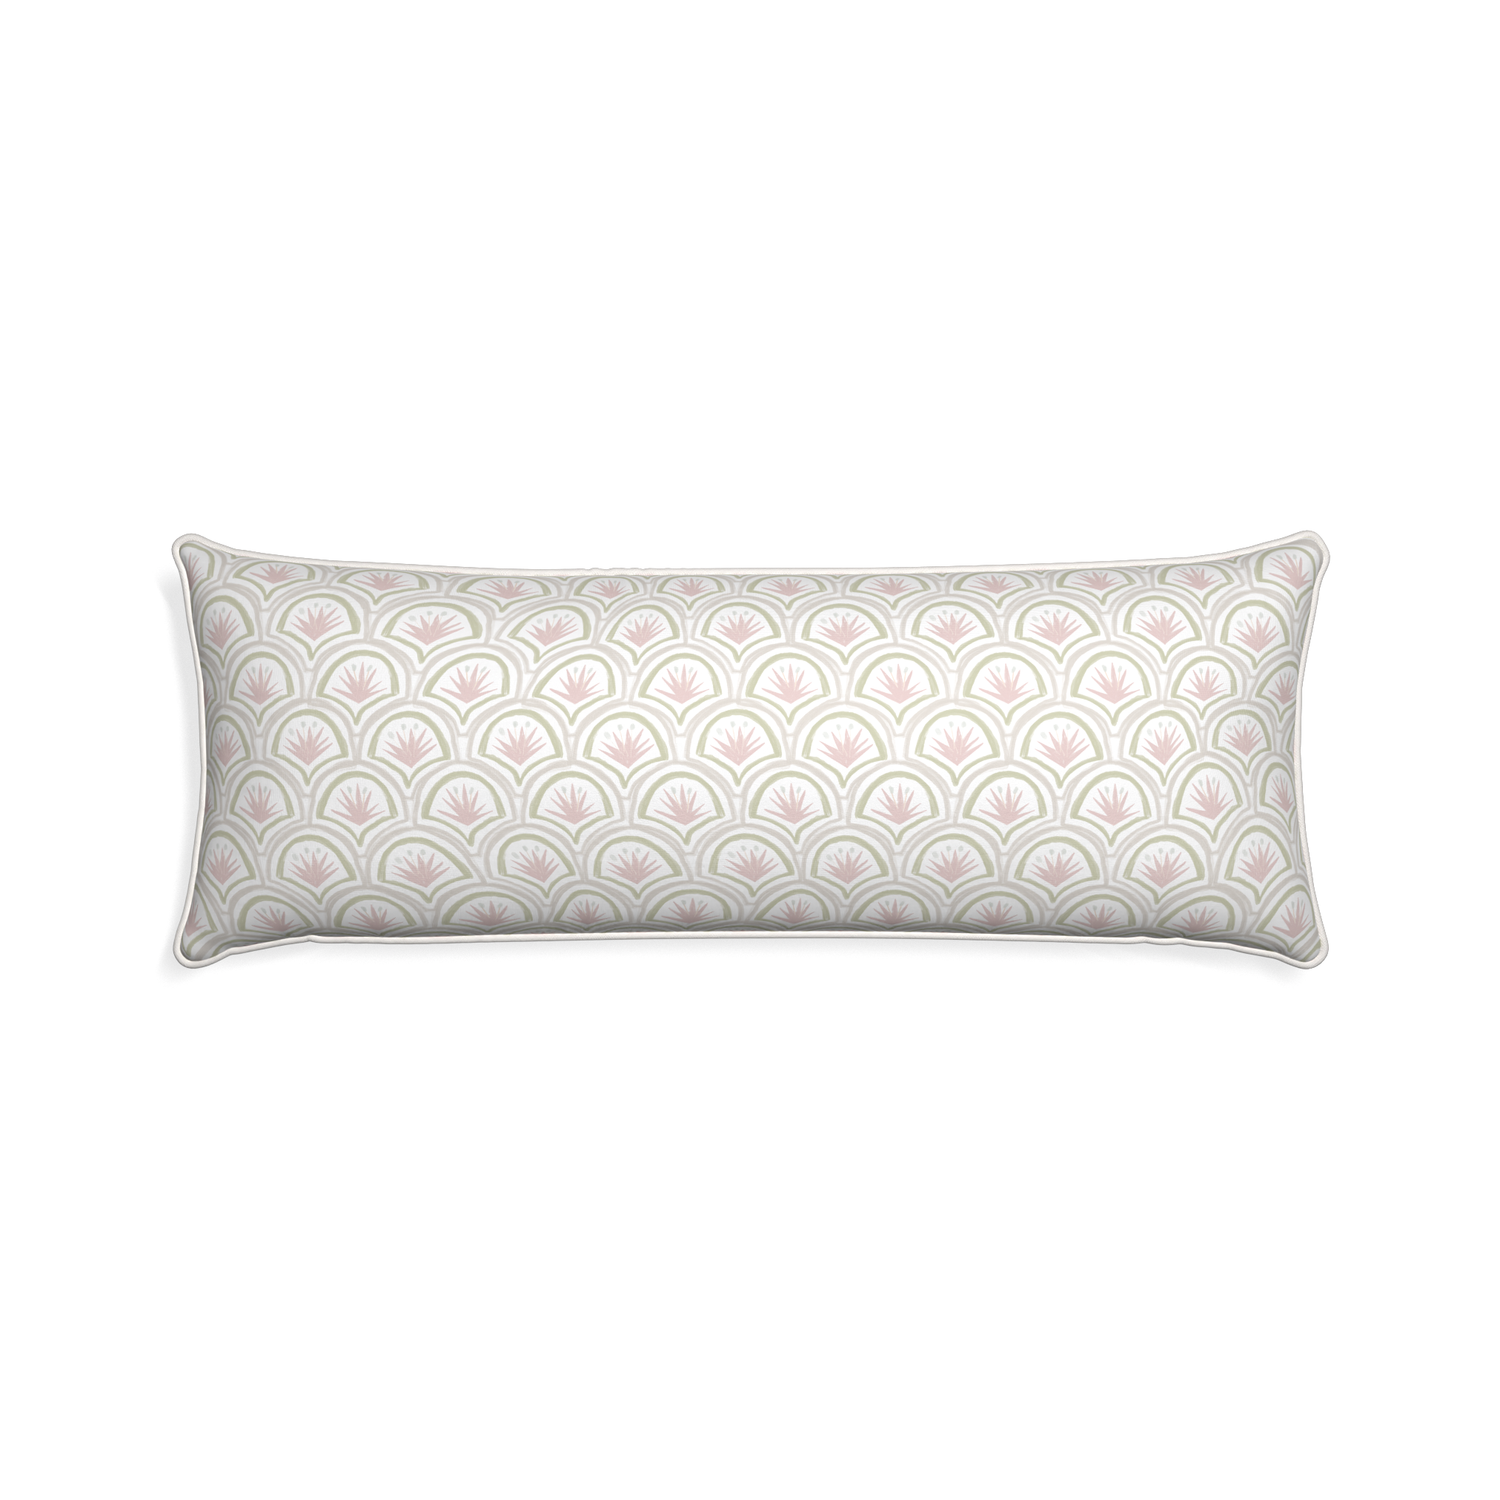 Xl-lumbar thatcher rose custom pillow with snow piping on white background